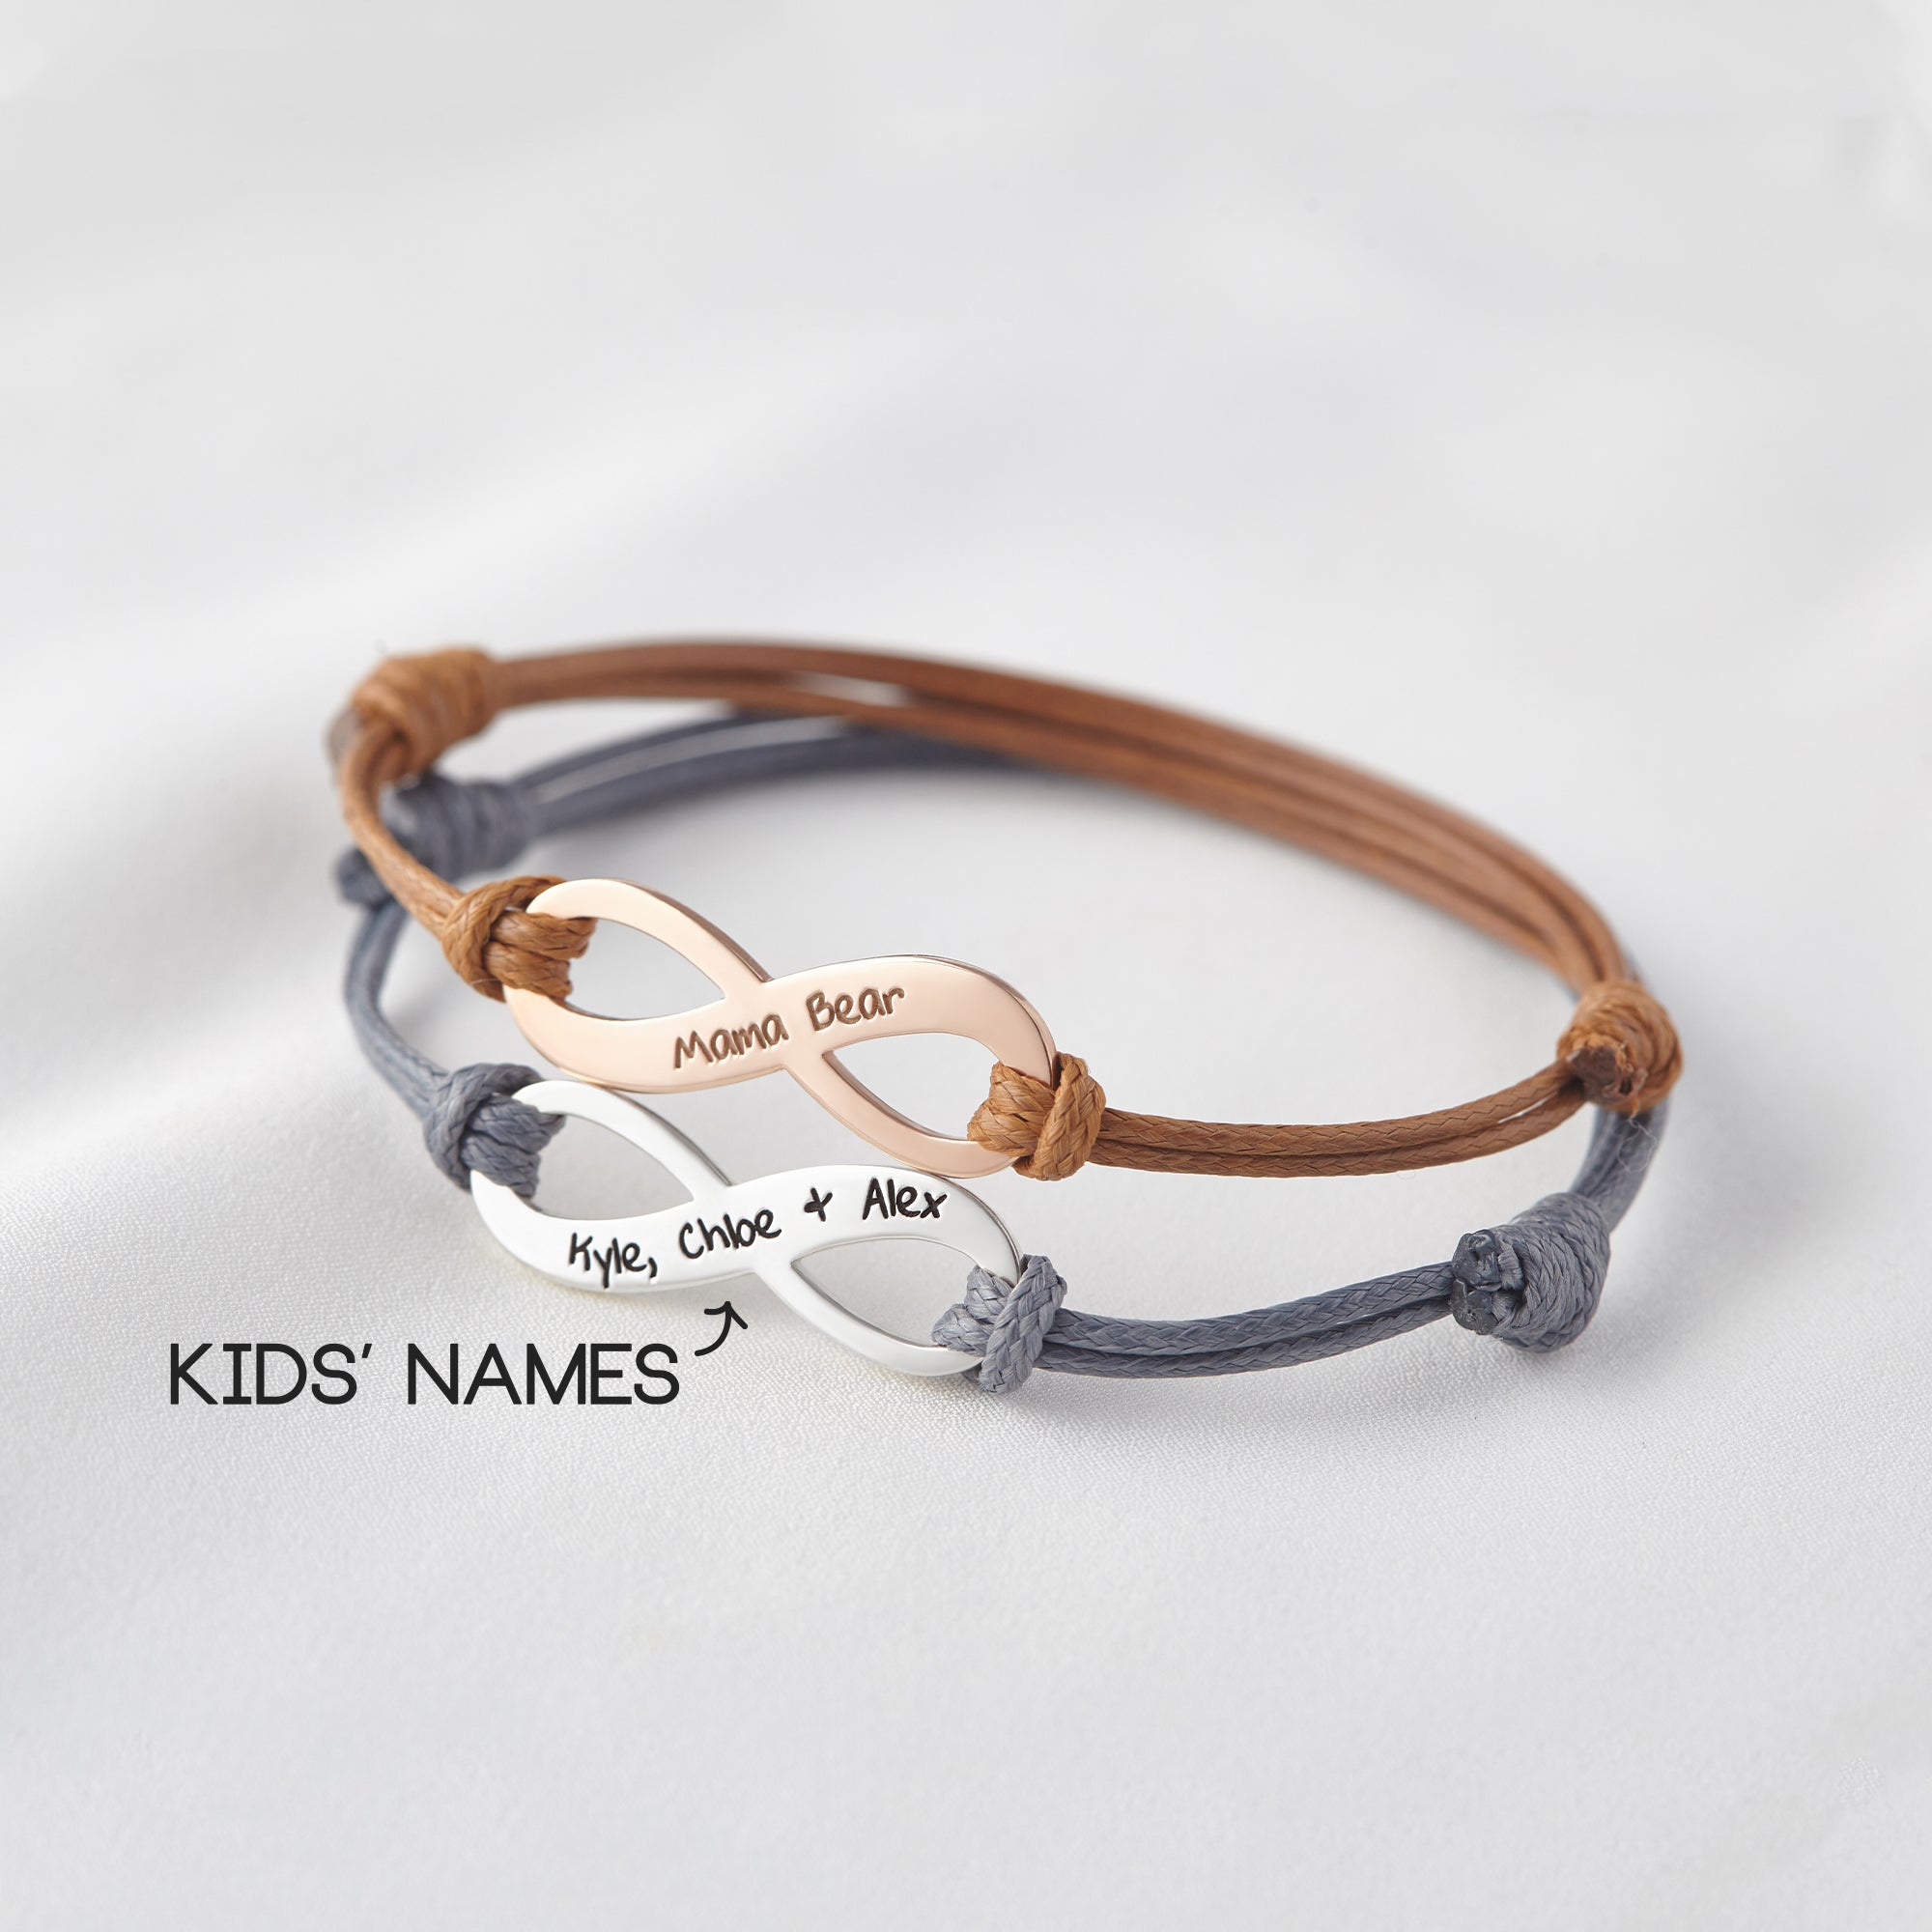 Personalized Infinity Leather Bracelet for Mom with Kids' Names and Message - 925 Sterling Silver and 18K Gold Plated Gift for Mother's Day and Special Occasions - Bracelets - Bijou Her -  -  - 